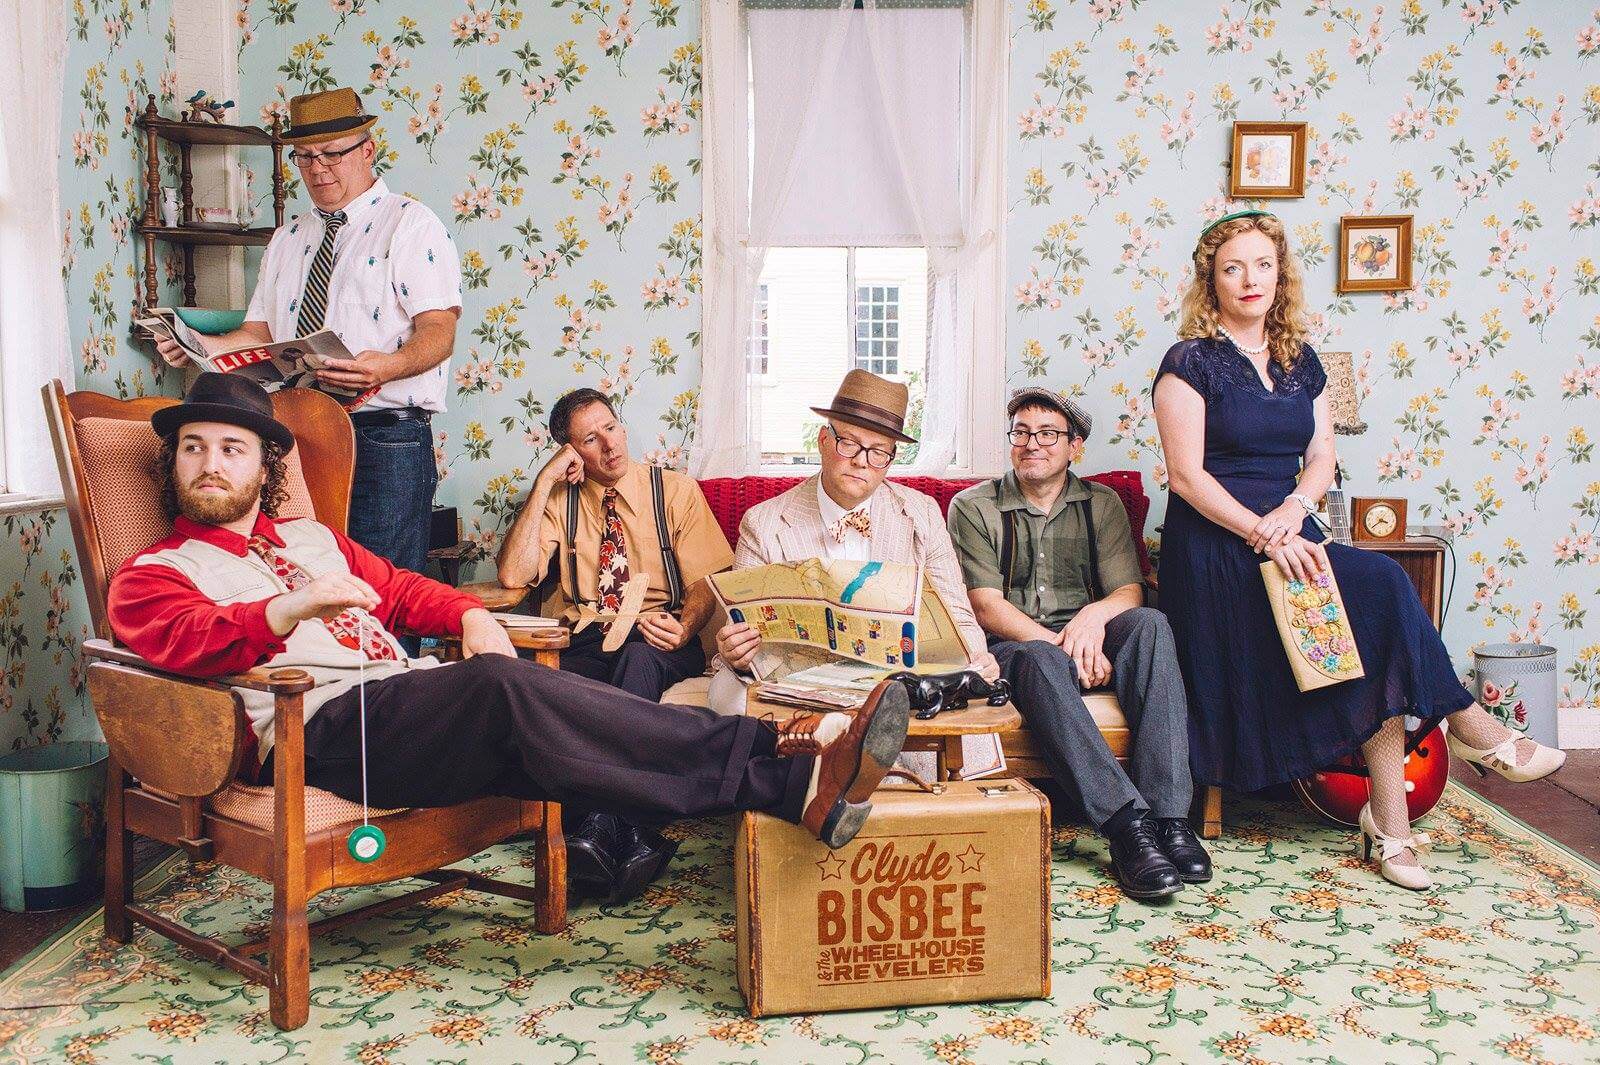 a six person band dressed in vintage attire